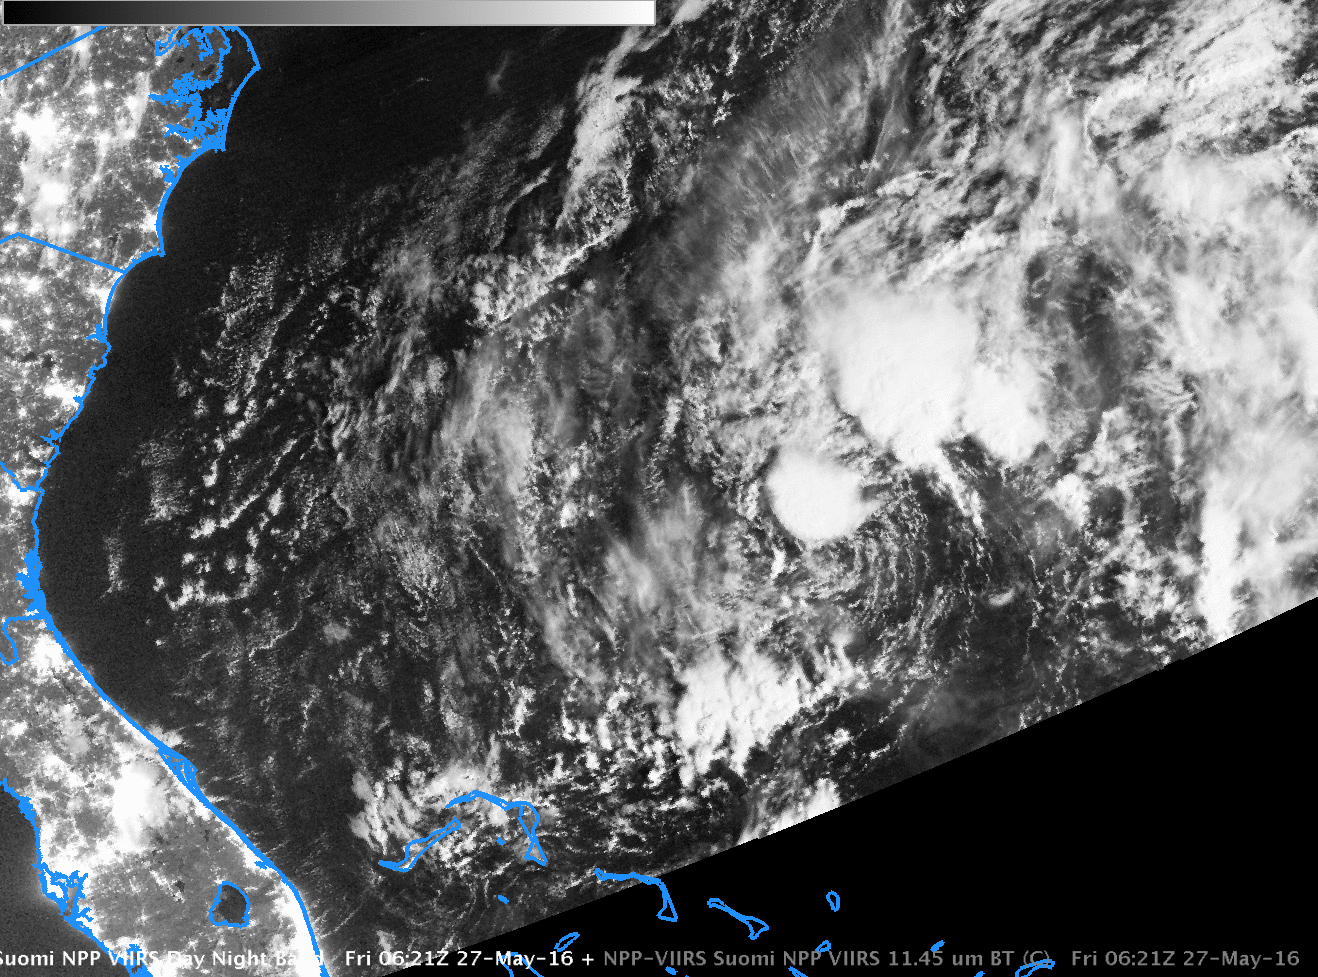 Suomi NPP VIIRS Day/Night Band (0.70 µm Visible) and Infrared (11.45 µm) Imagery at 0621 UTC on 27 May 2016 [click to enlarge]